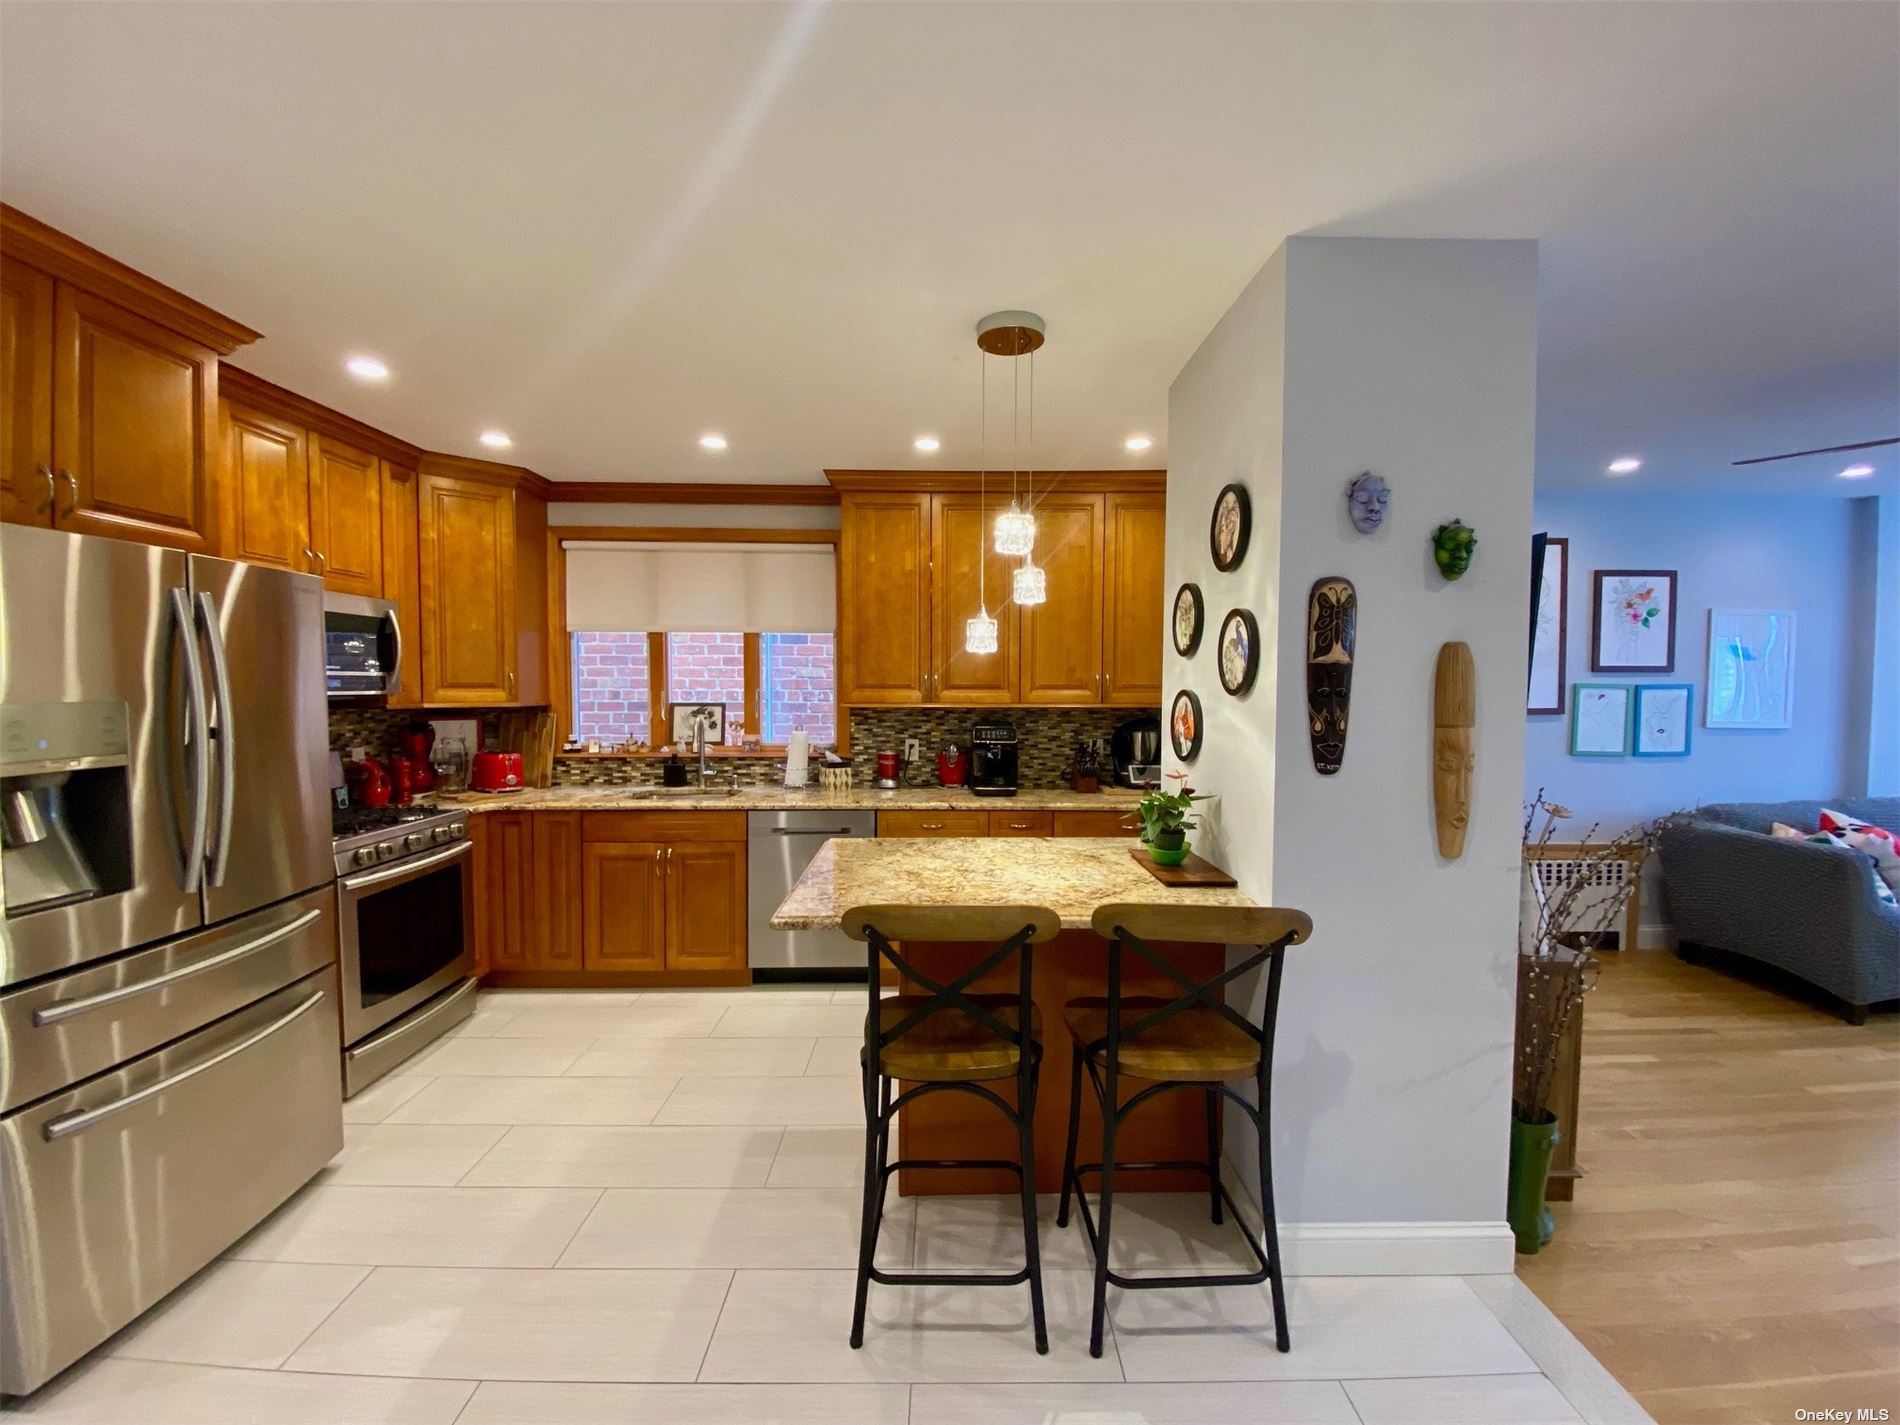 a kitchen with stainless steel appliances kitchen island granite countertop a refrigerator oven a sink a dining table and chairs with wooden floor